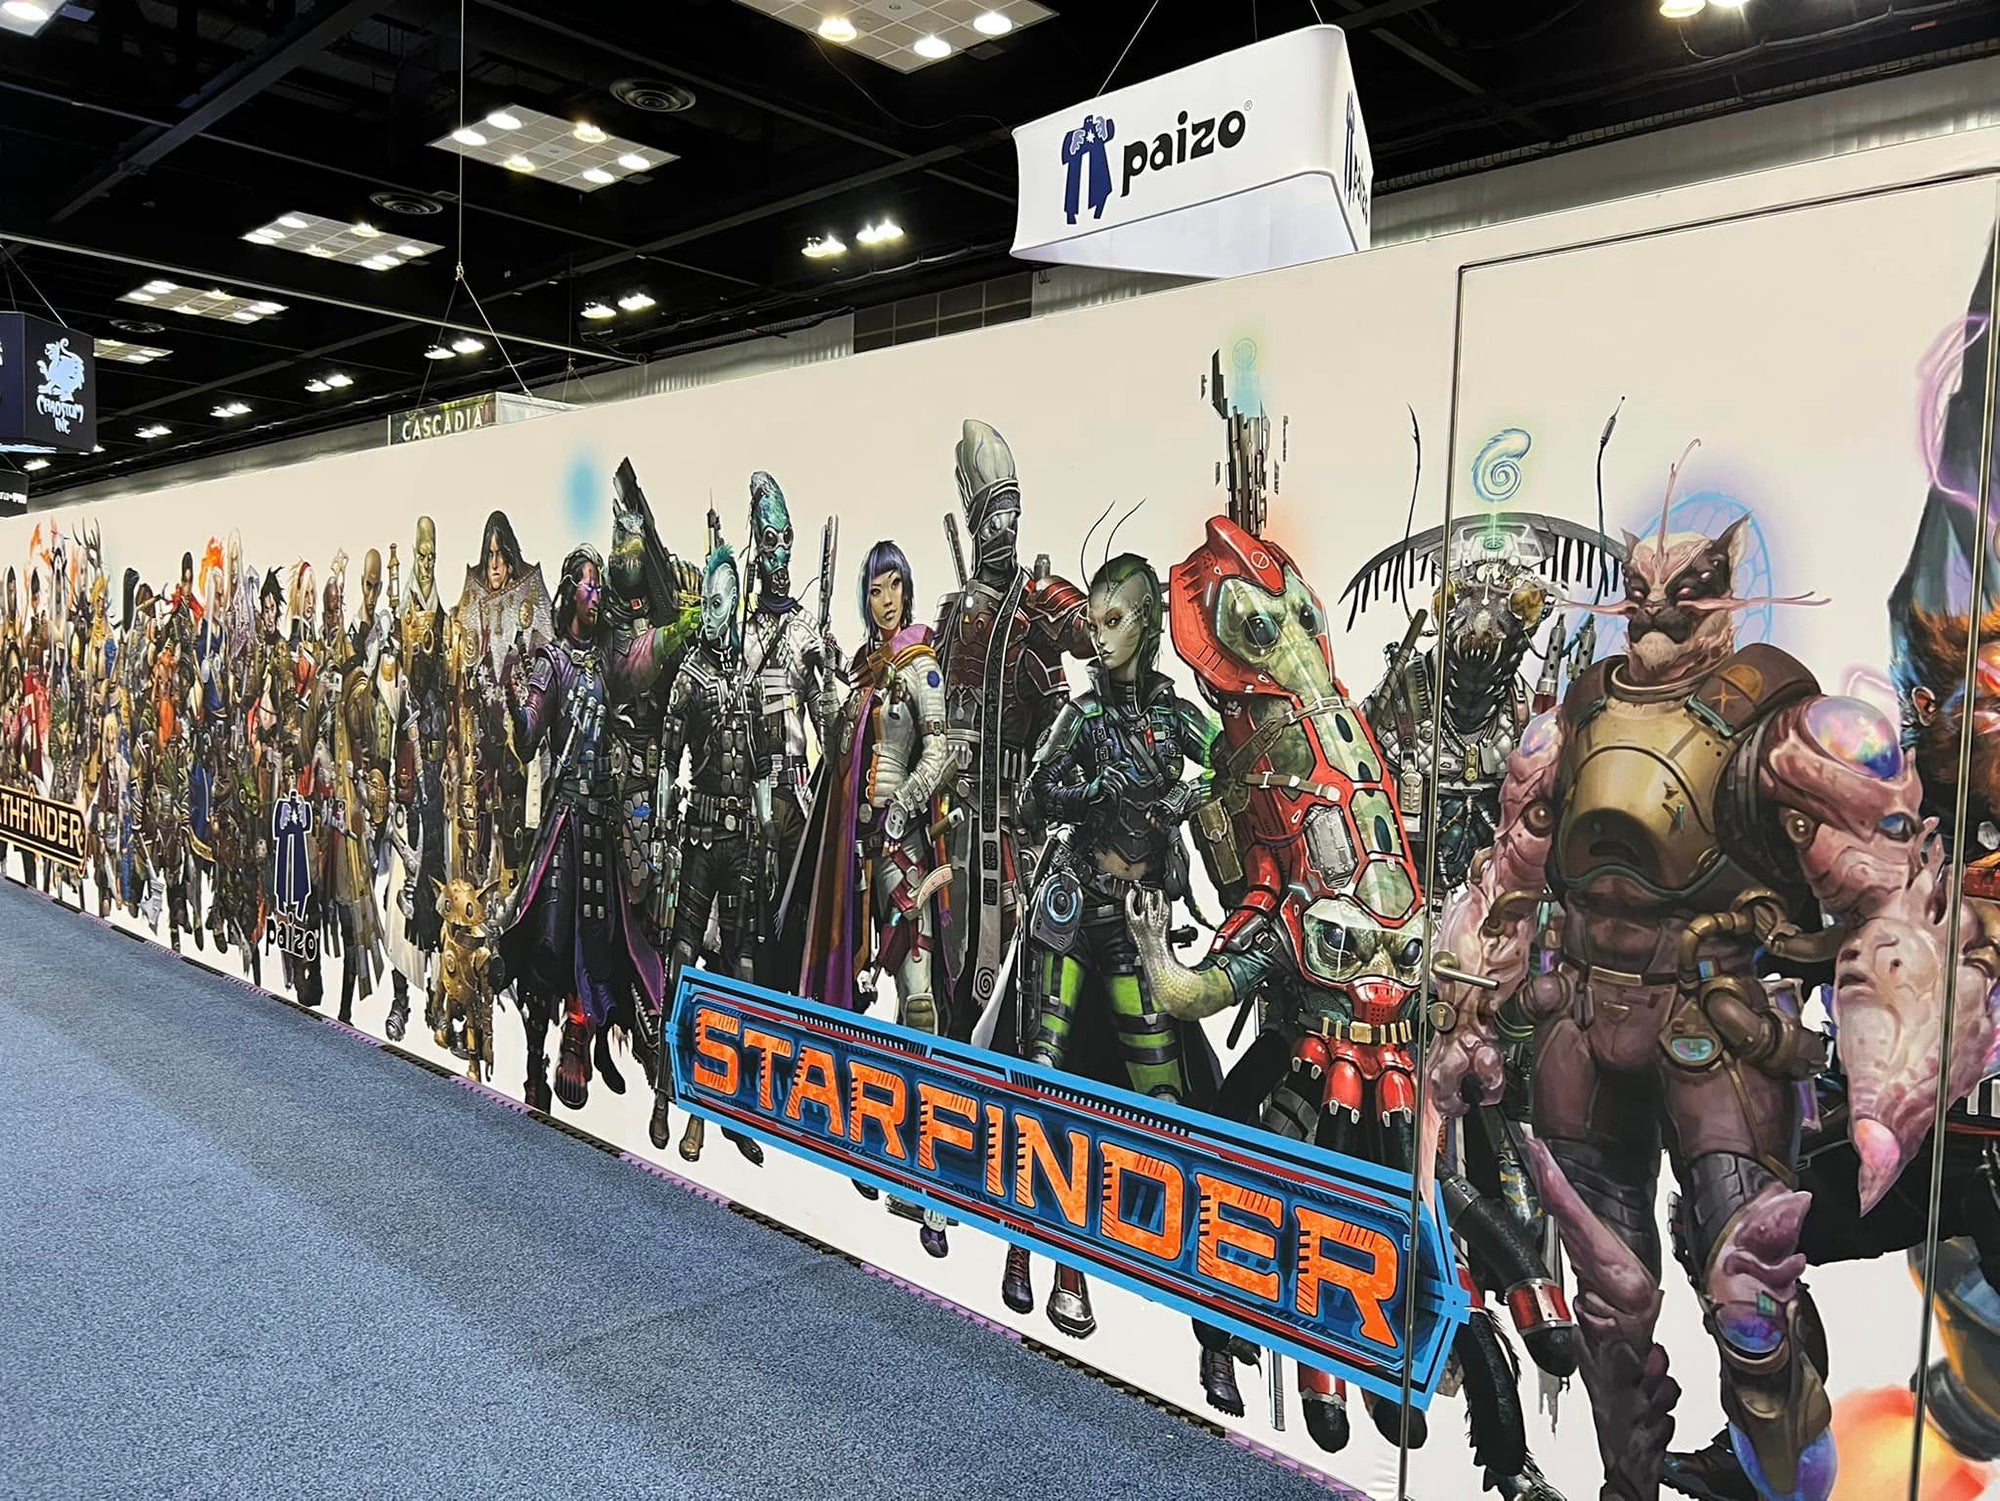 The Back of the Paizo Booth wall featuring all the Pathfinder and Starfinder Iconics